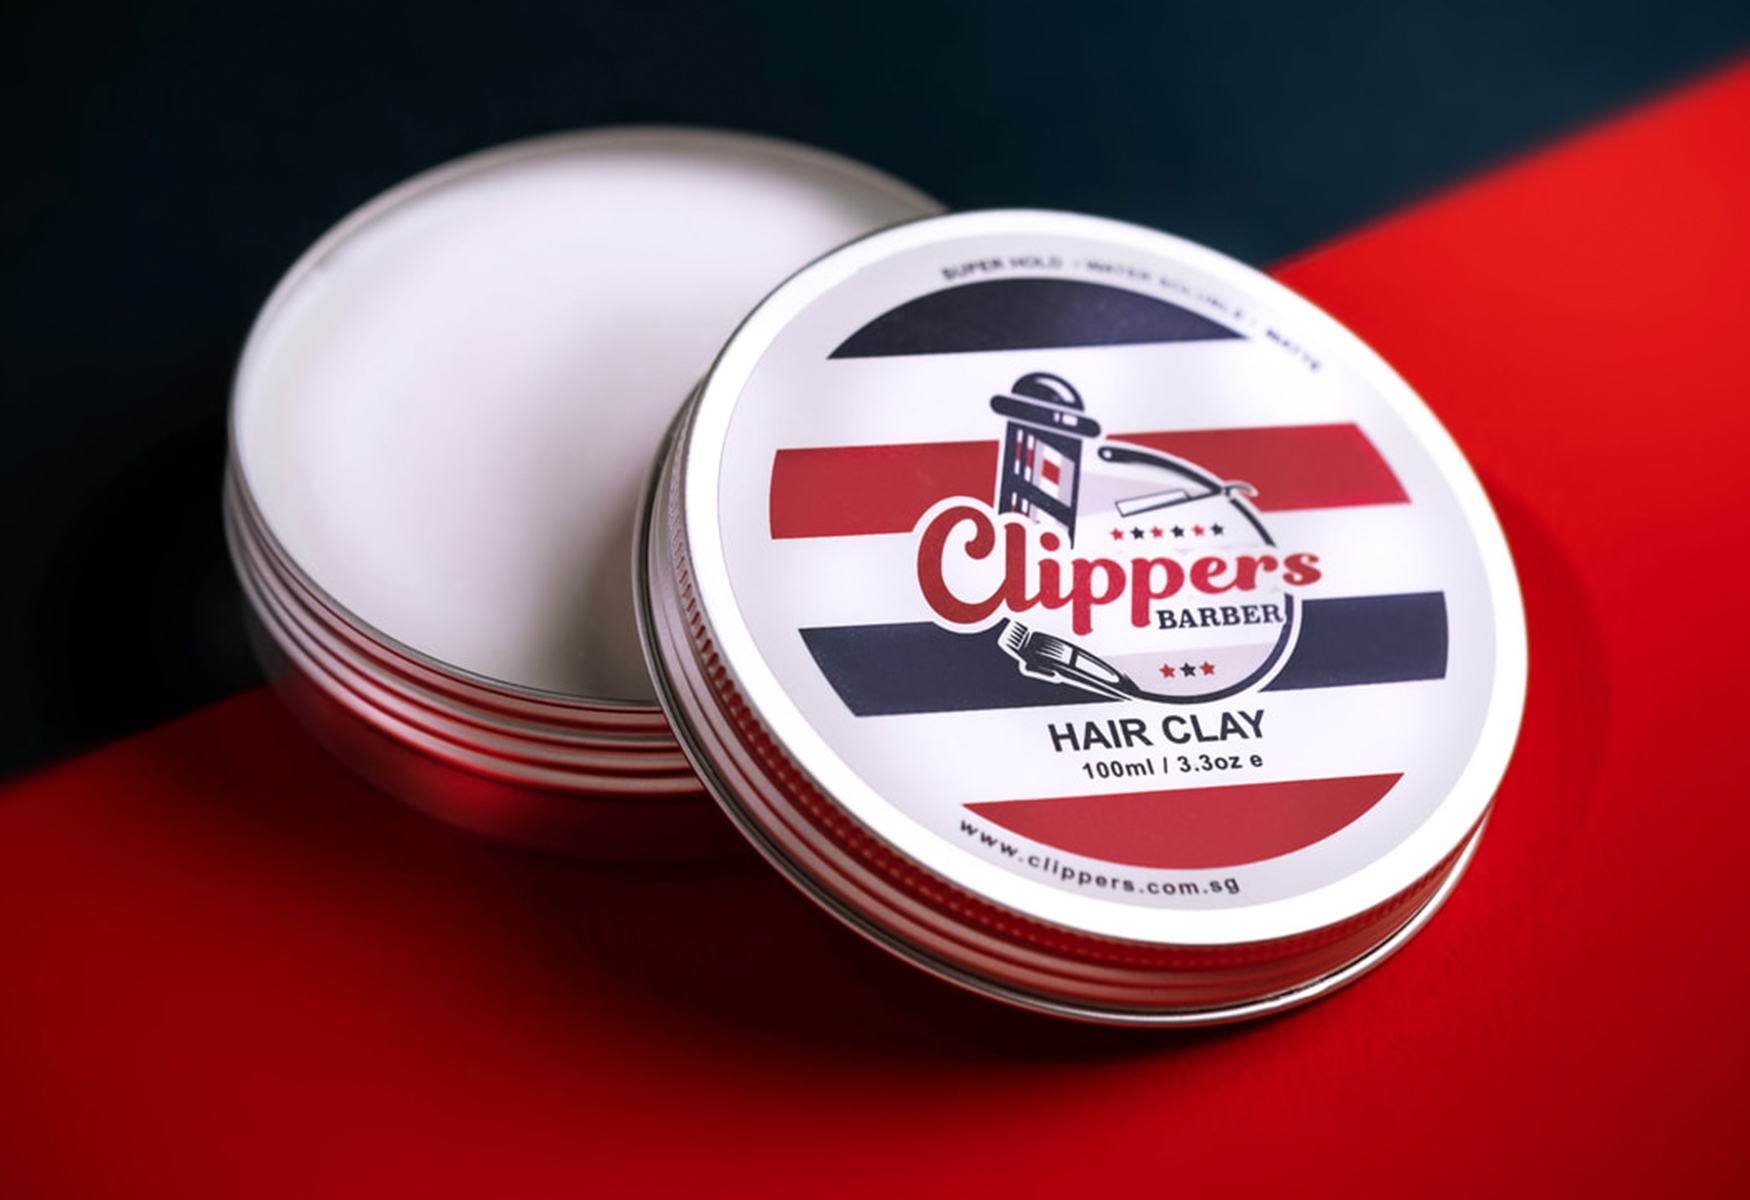 Clippers Barber Funan